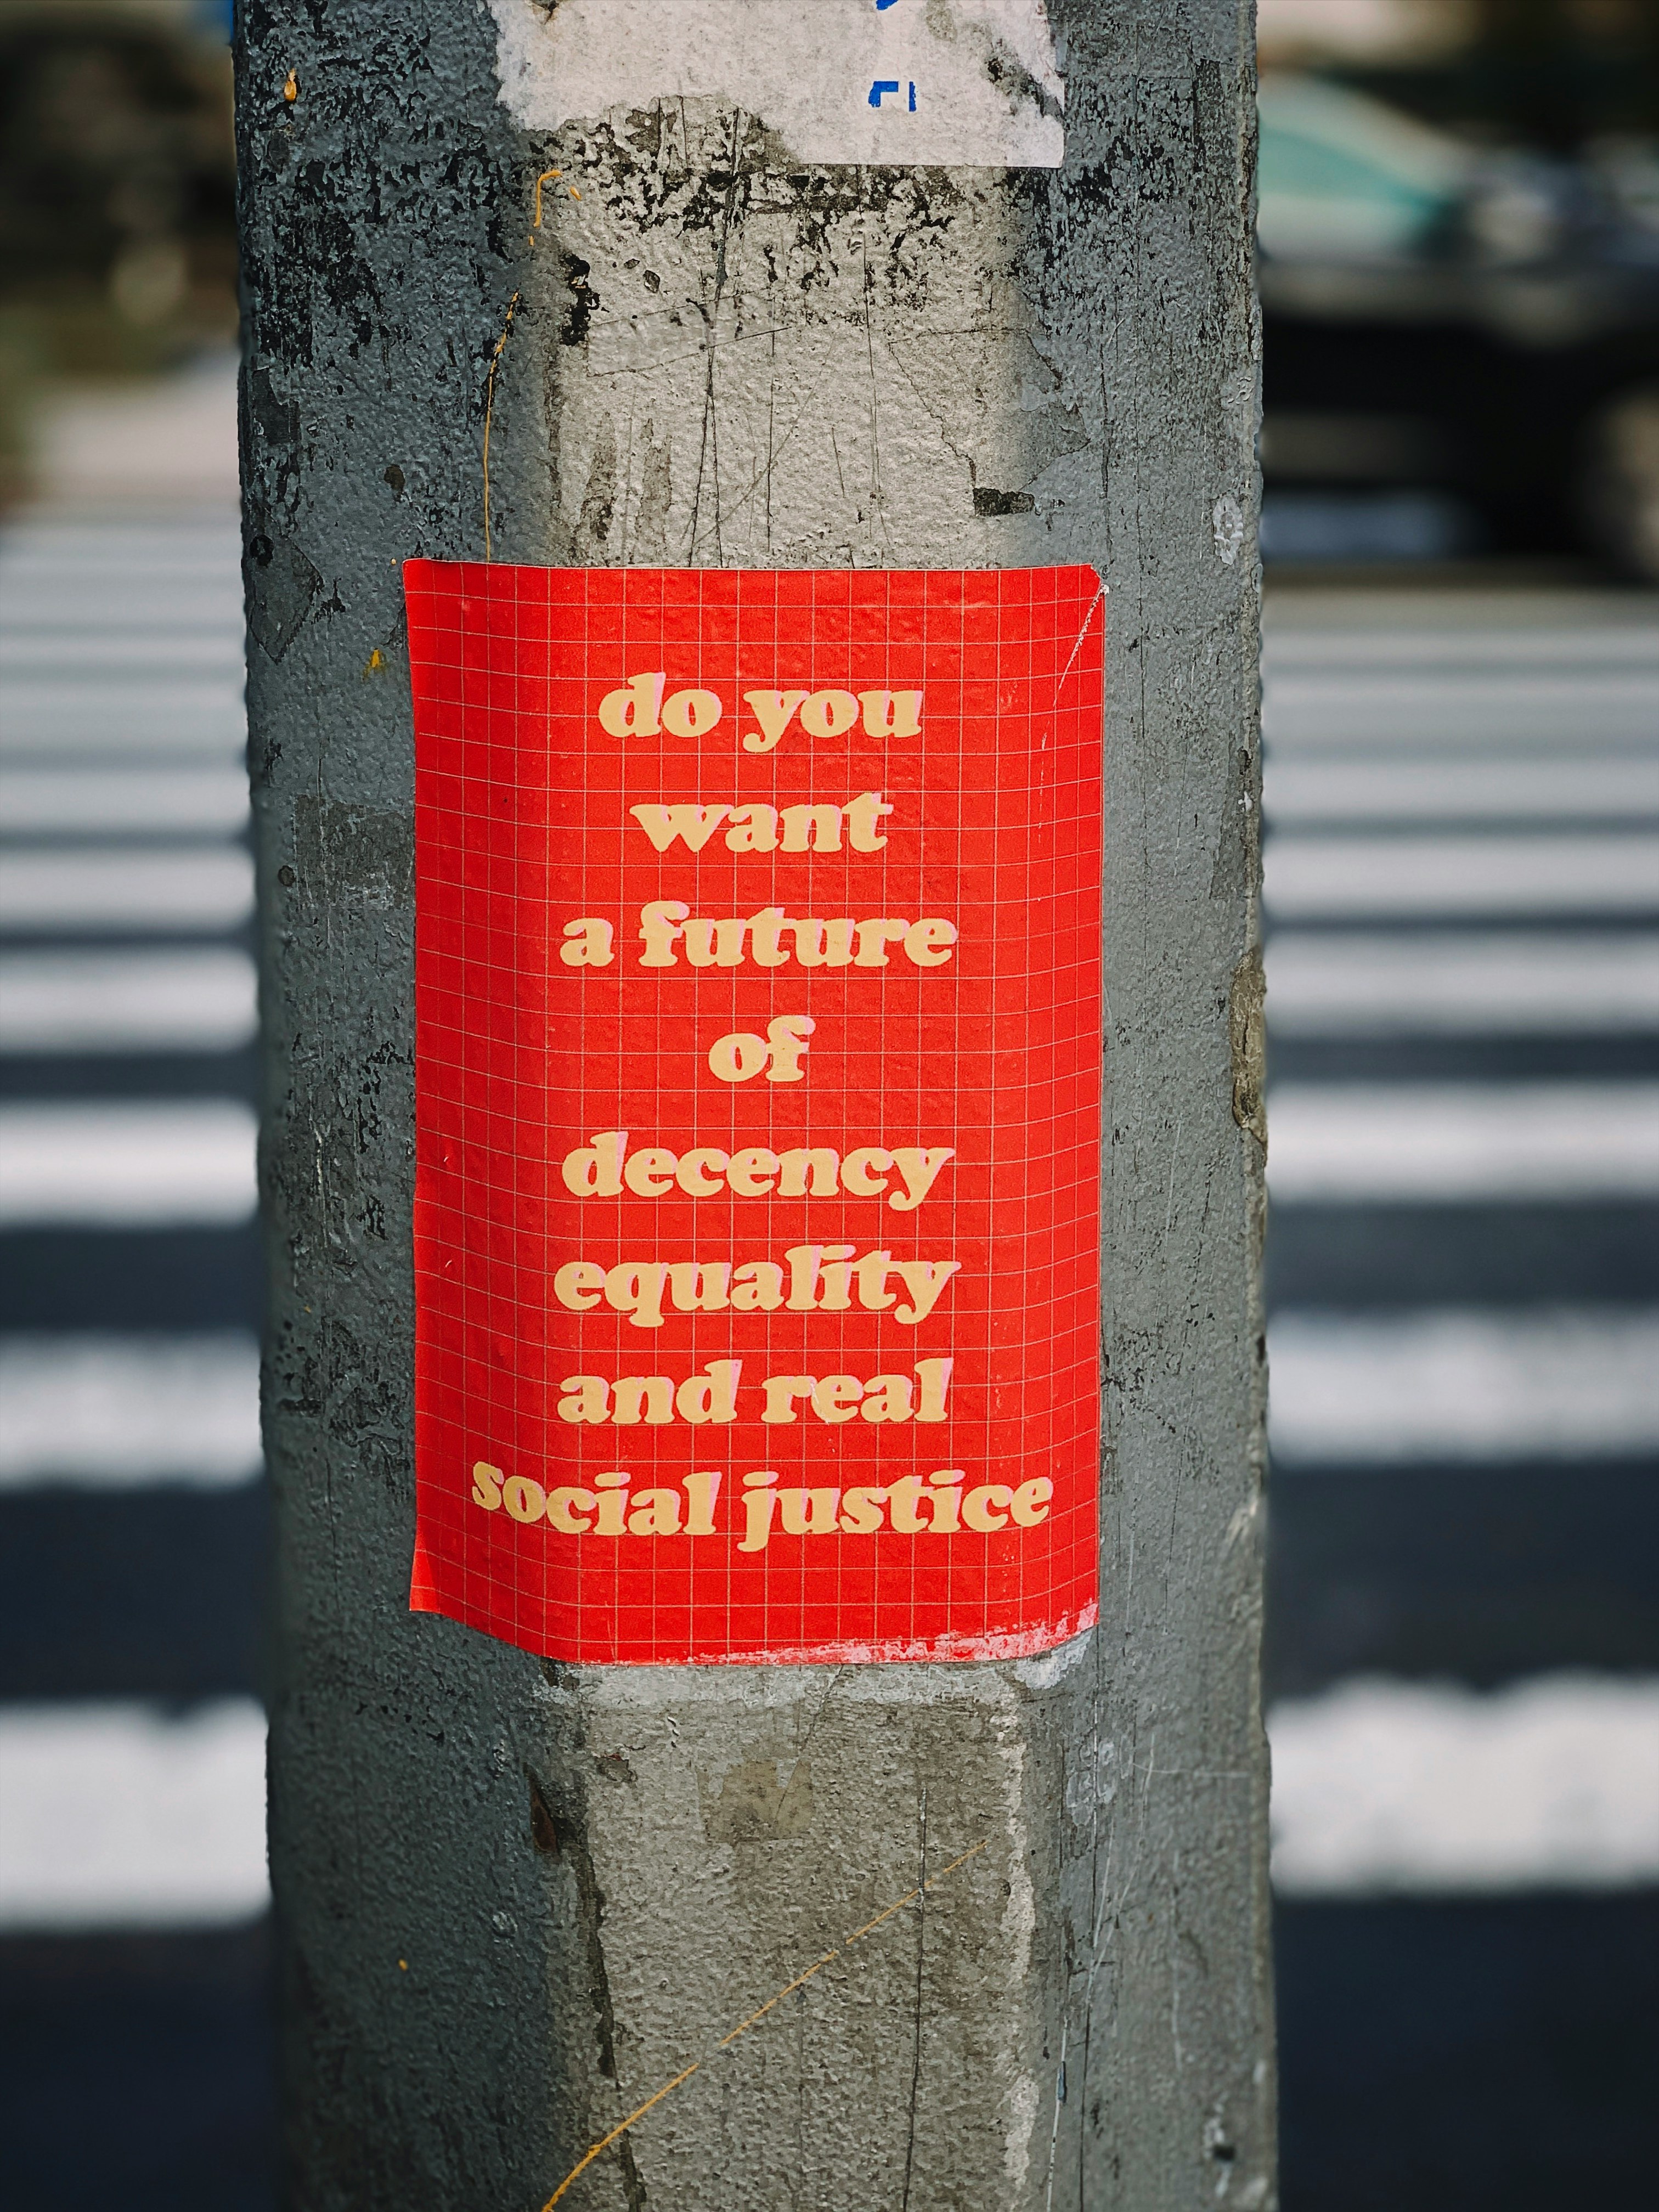 do you want a Future of Decency Equality and real social justice wall decor